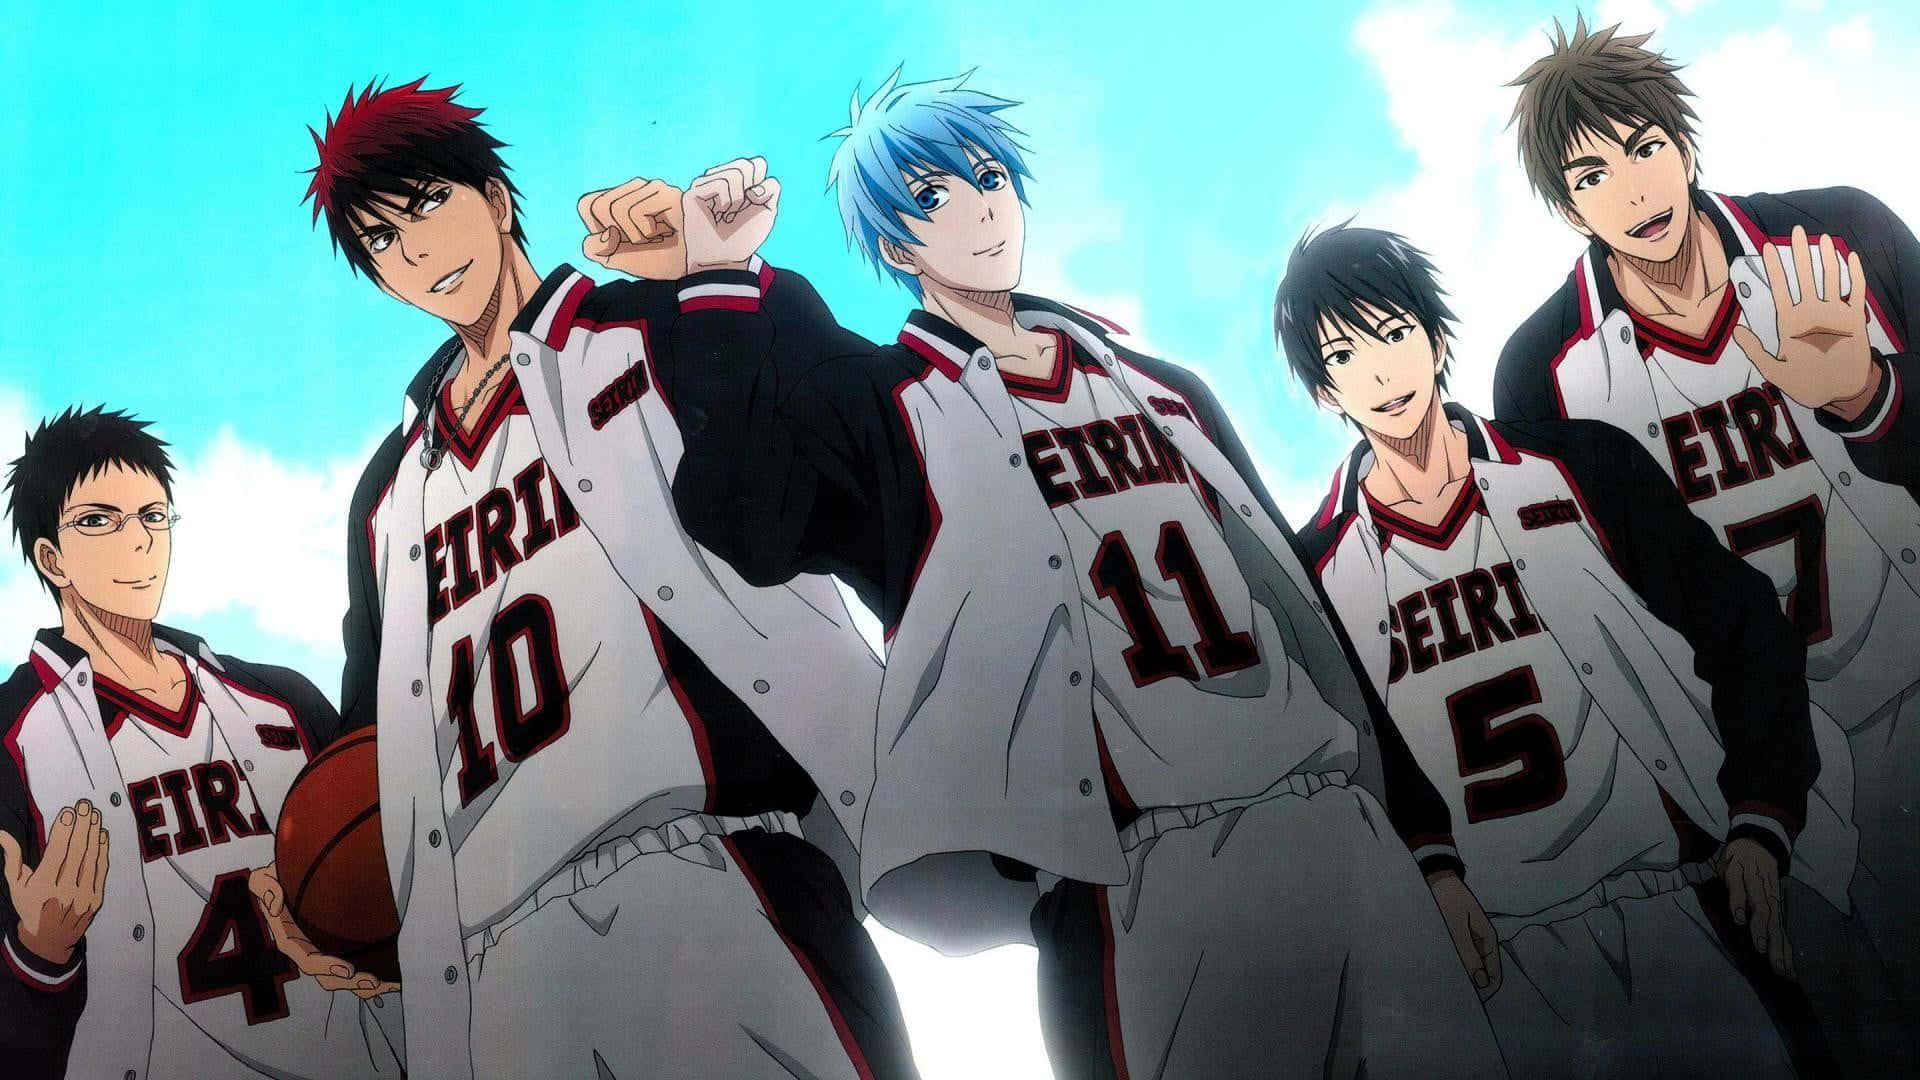 Grab a ball and be a part of the action with Kuroko No Basket!